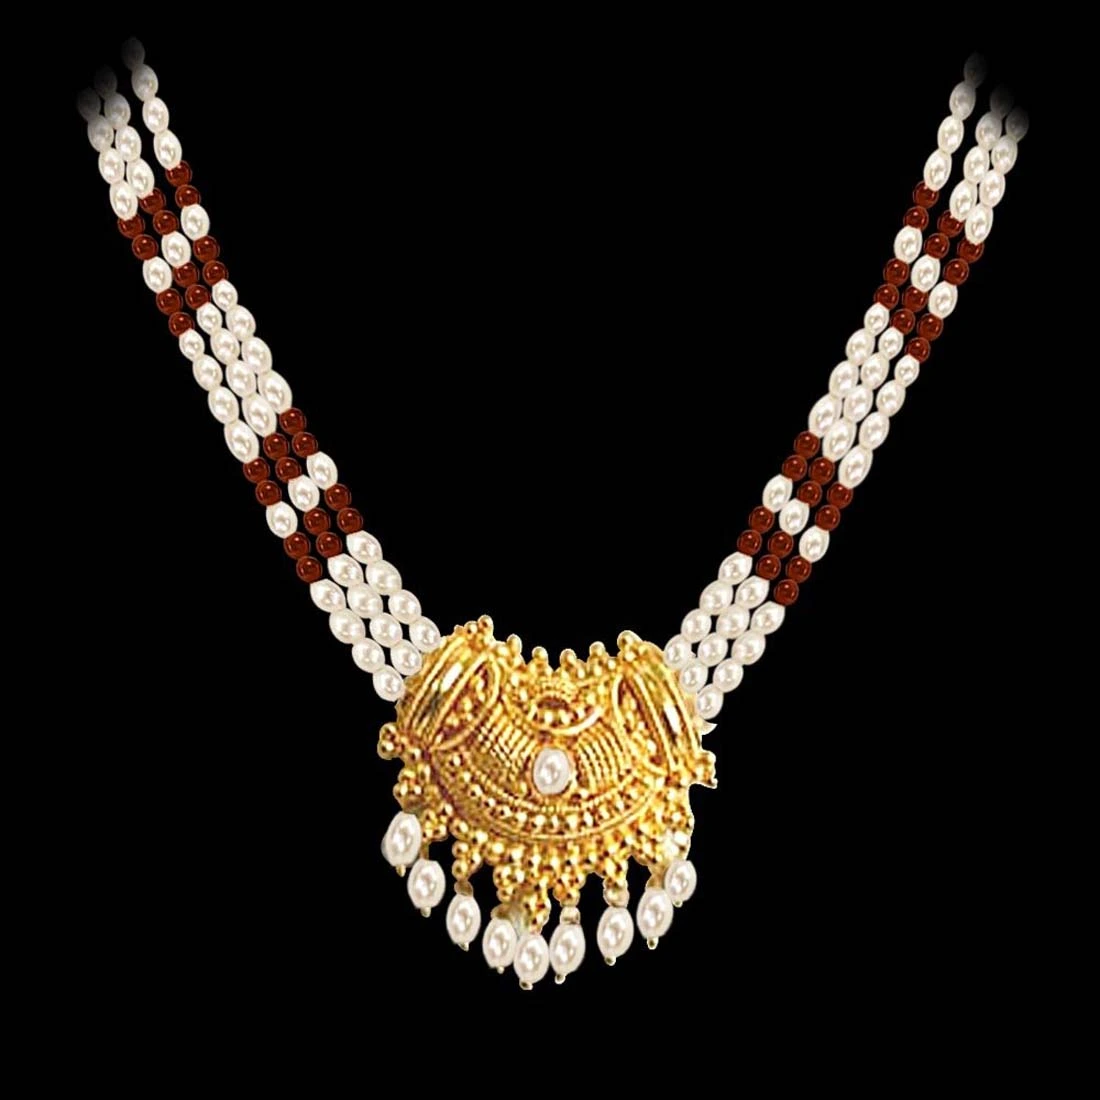 Gold Plated Temple Design Pendant & 3 Line Rice Pearl & Garnet Beads Necklace for Women (SNP4A)